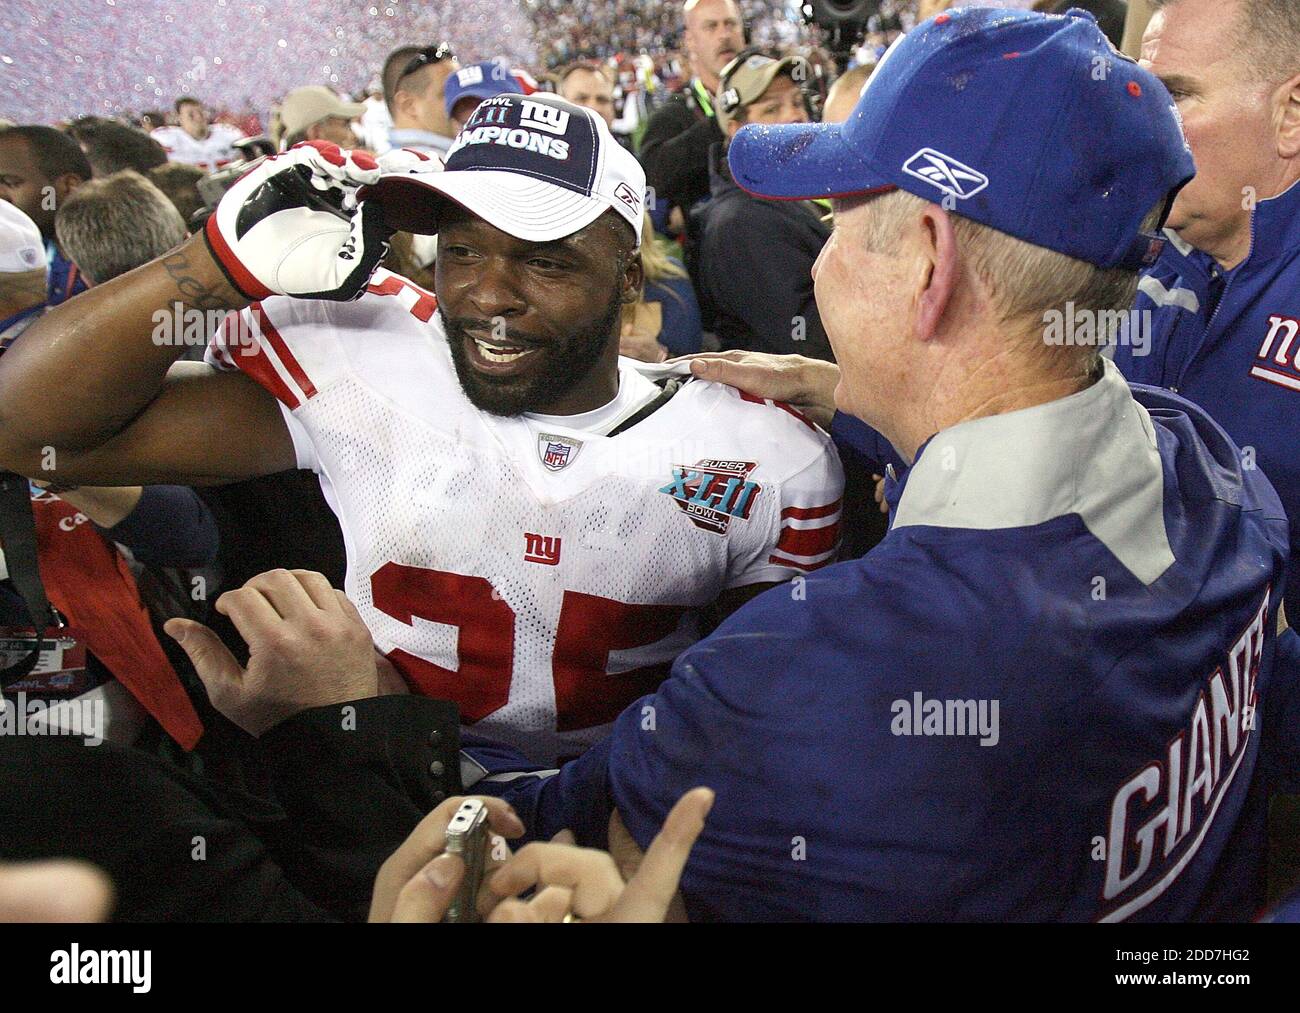 The New York Giants' head coach Tom Coughlin, right, and R.W. McQuarters celebrate after a 17-14 Giants' victory in Super Bowl XLII at University of Phoenix Stadium in Glendale, AZ, USA on February 3, 2008.  The NY Giants won 17-14. Photo by Gary W. Green/MCT/Cameleon/ABACAPRESS.COM Stock Photo